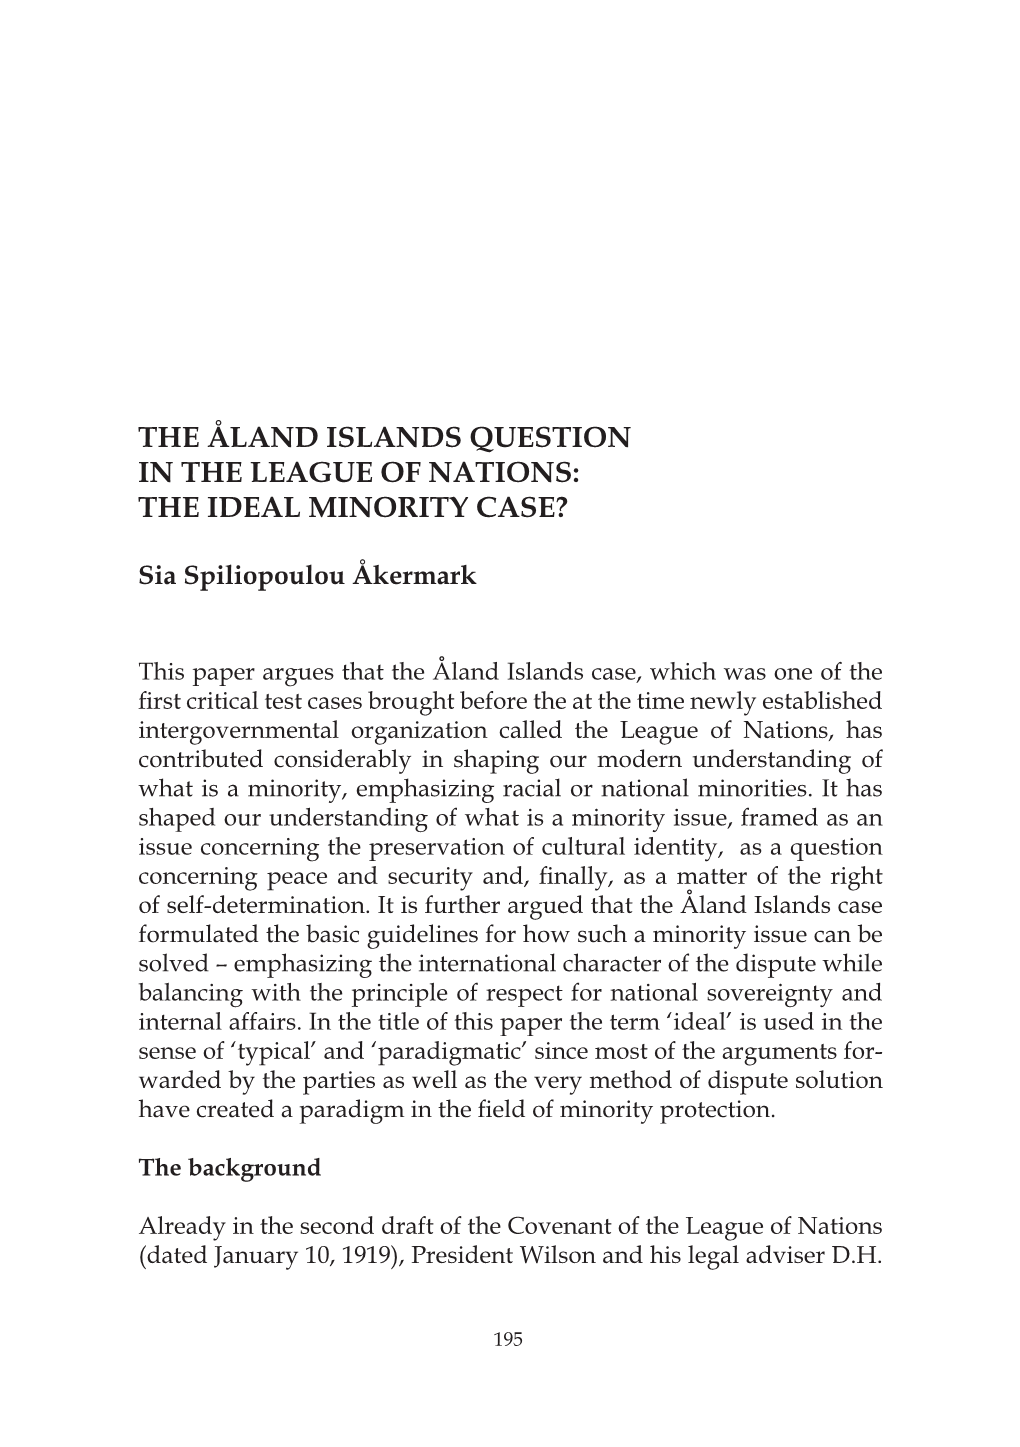 The Åland Islands Question in the League of Nations: the Ideal Minority Case?